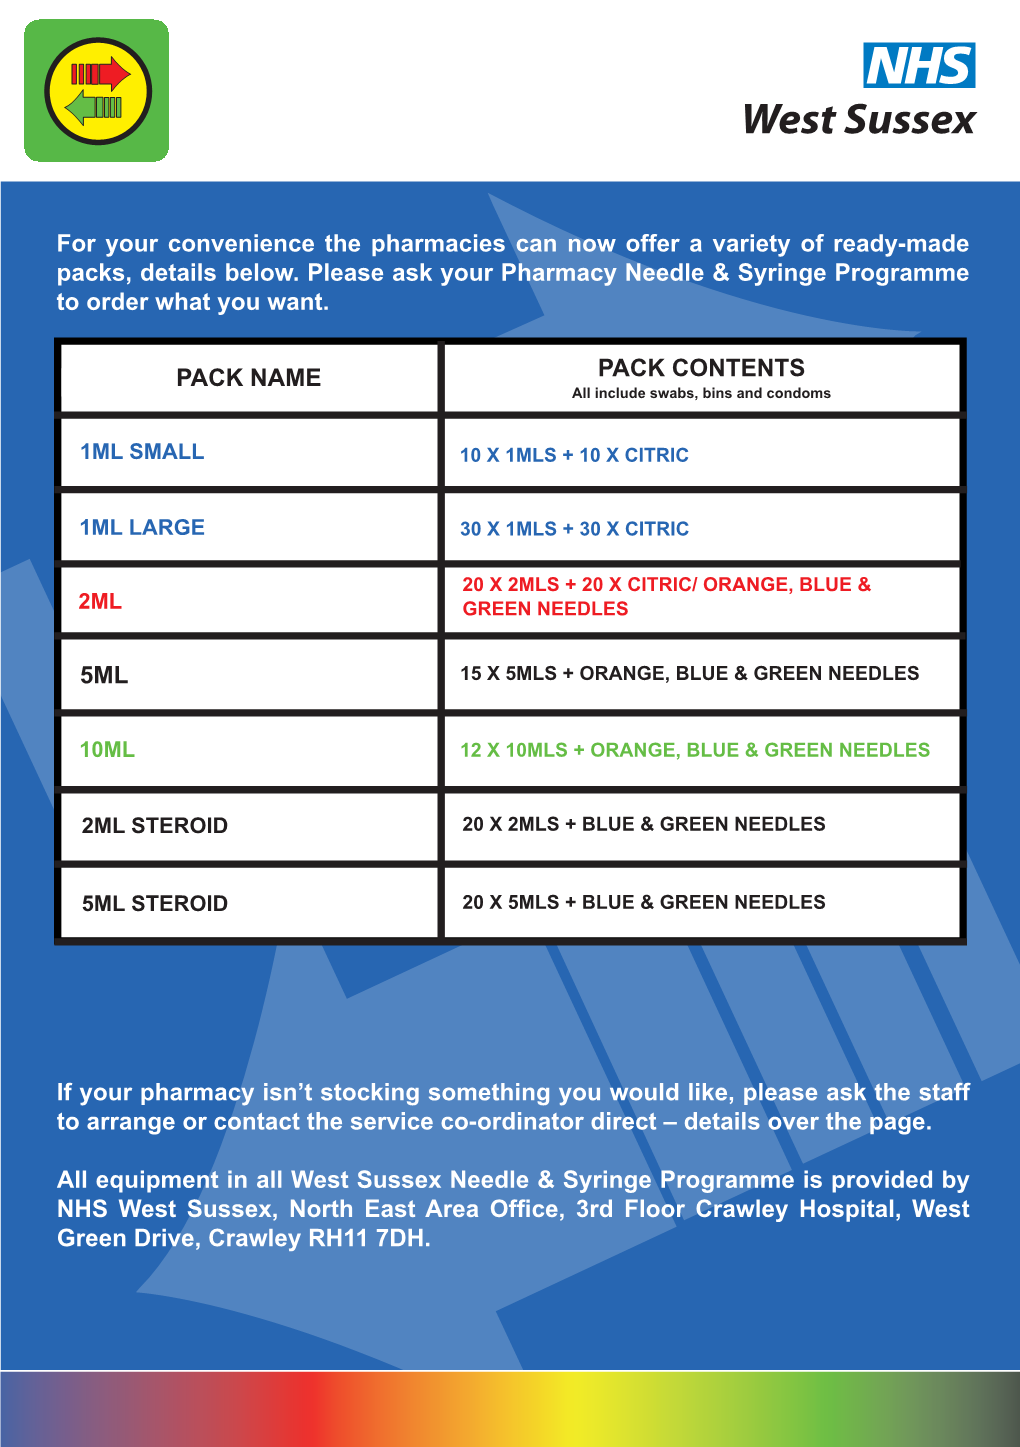 For Your Convenience the Pharmacies Can Now Offer a Variety of Ready-Made Packs, Details Below